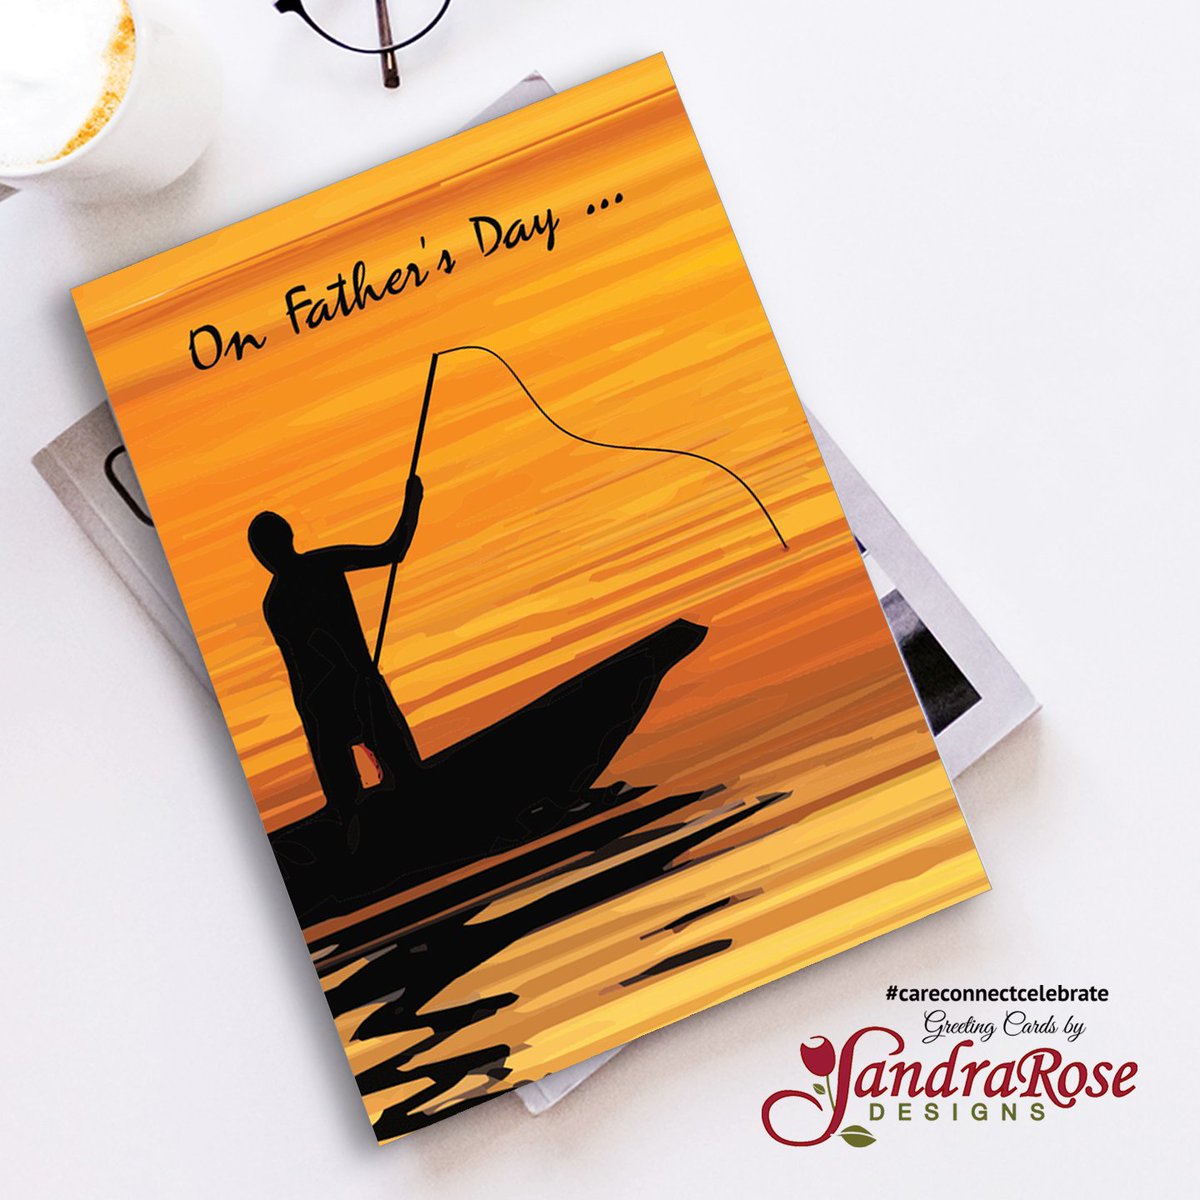 For the fishing lover, what better way to enjoy Father’s Day than a card with a man in a boat, fishing at sunset. Remind him what a great dad he is as well as a “reel” friend. #CareConnectCelebrate #SandraRoseDesigns @GCUniverse #Greetingcards greetingcarduniverse.com/holiday-cards/…